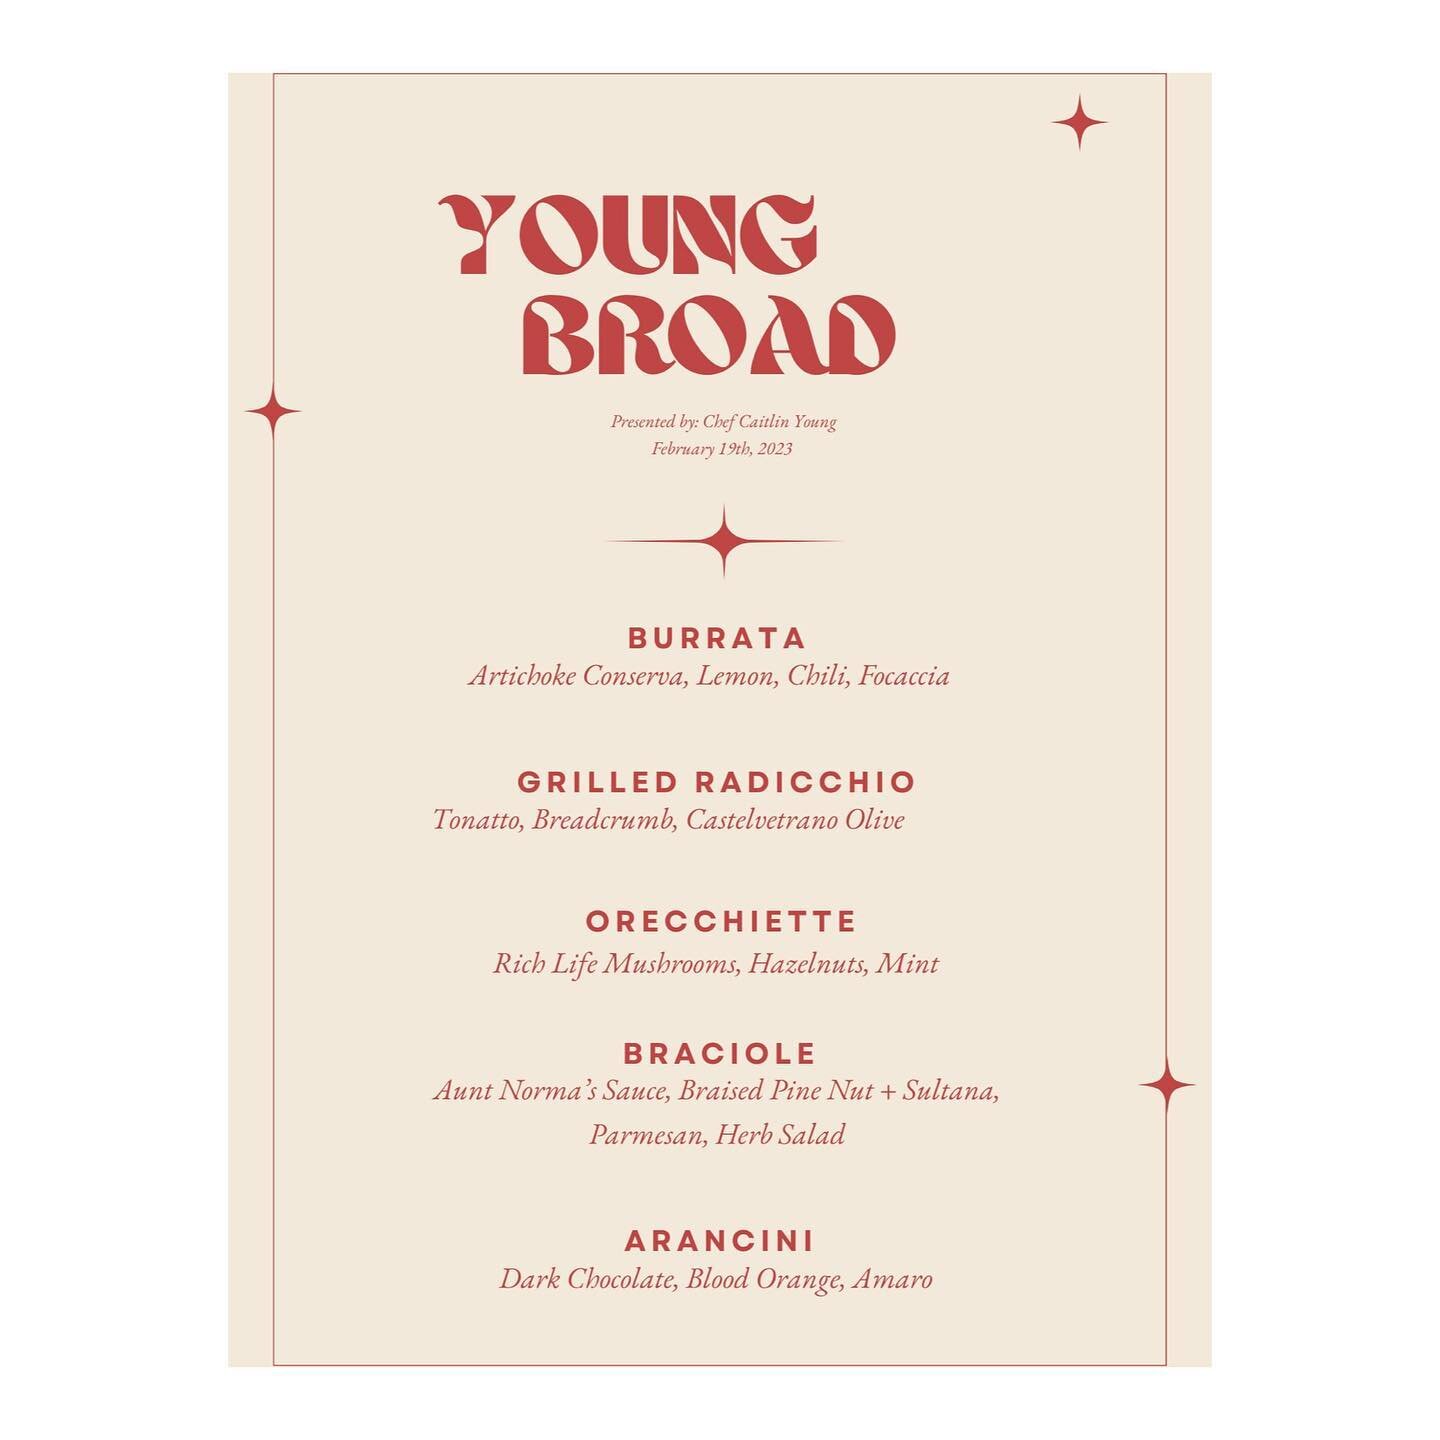 Here it is, famiglia - This Sunday&rsquo;s Young Broad menu! 

Made with love and smothered in red sauce, come hungry and let me treat you like family. The menu may read fancy, but this is what it really means &hellip; 

-Homemade Cheese
-Homemade Br